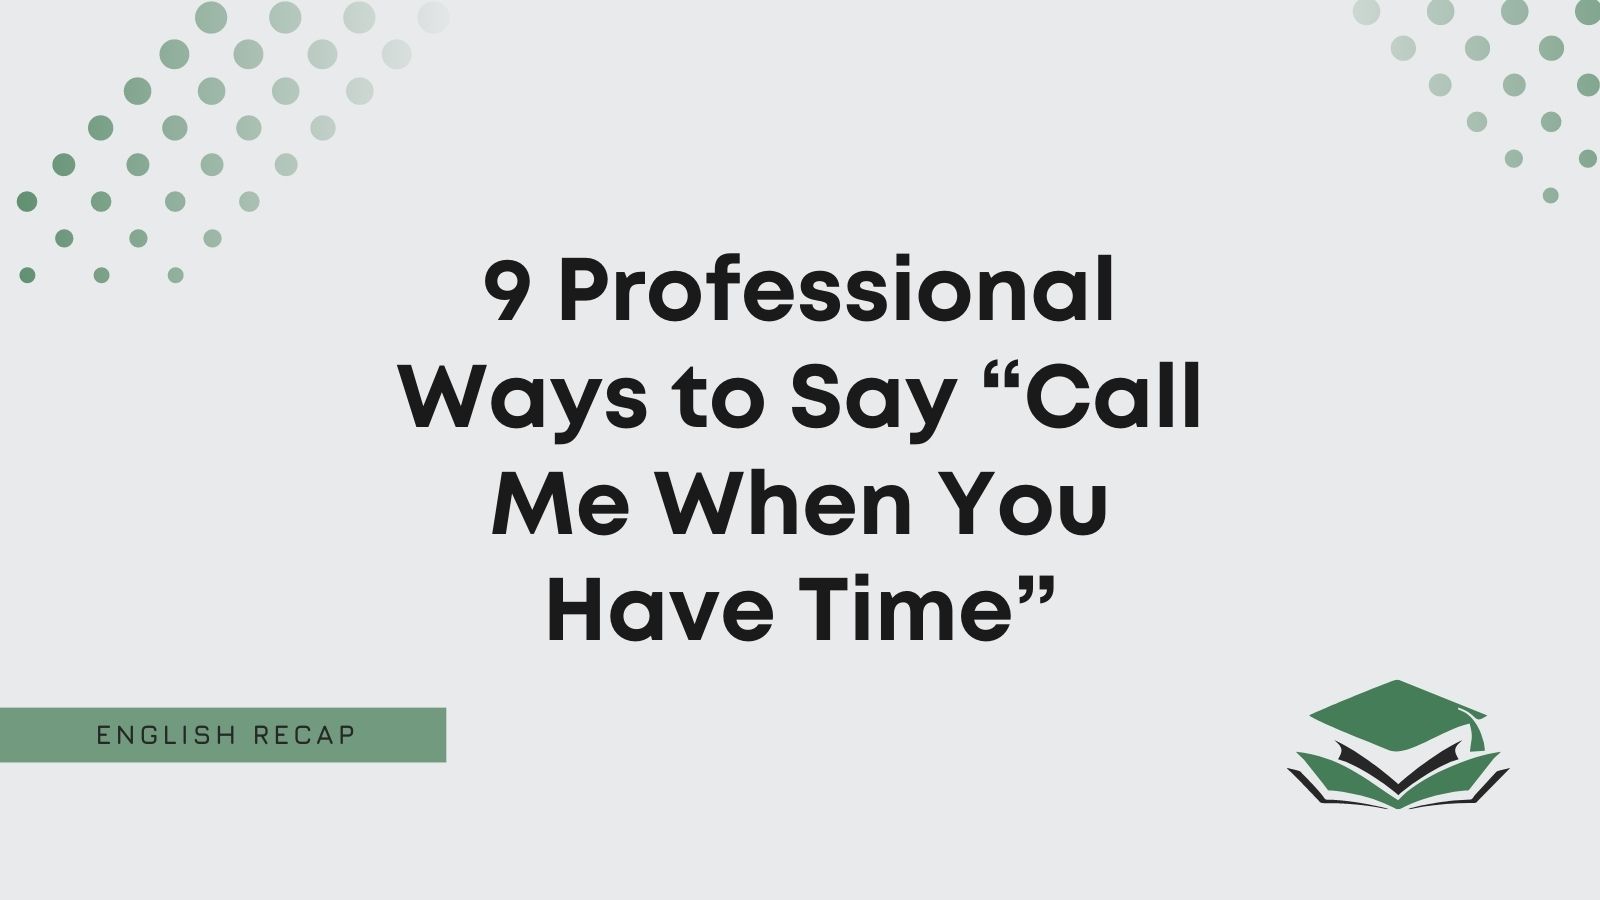 9 Professional Ways to Say “Call Me When You Have Time” - English